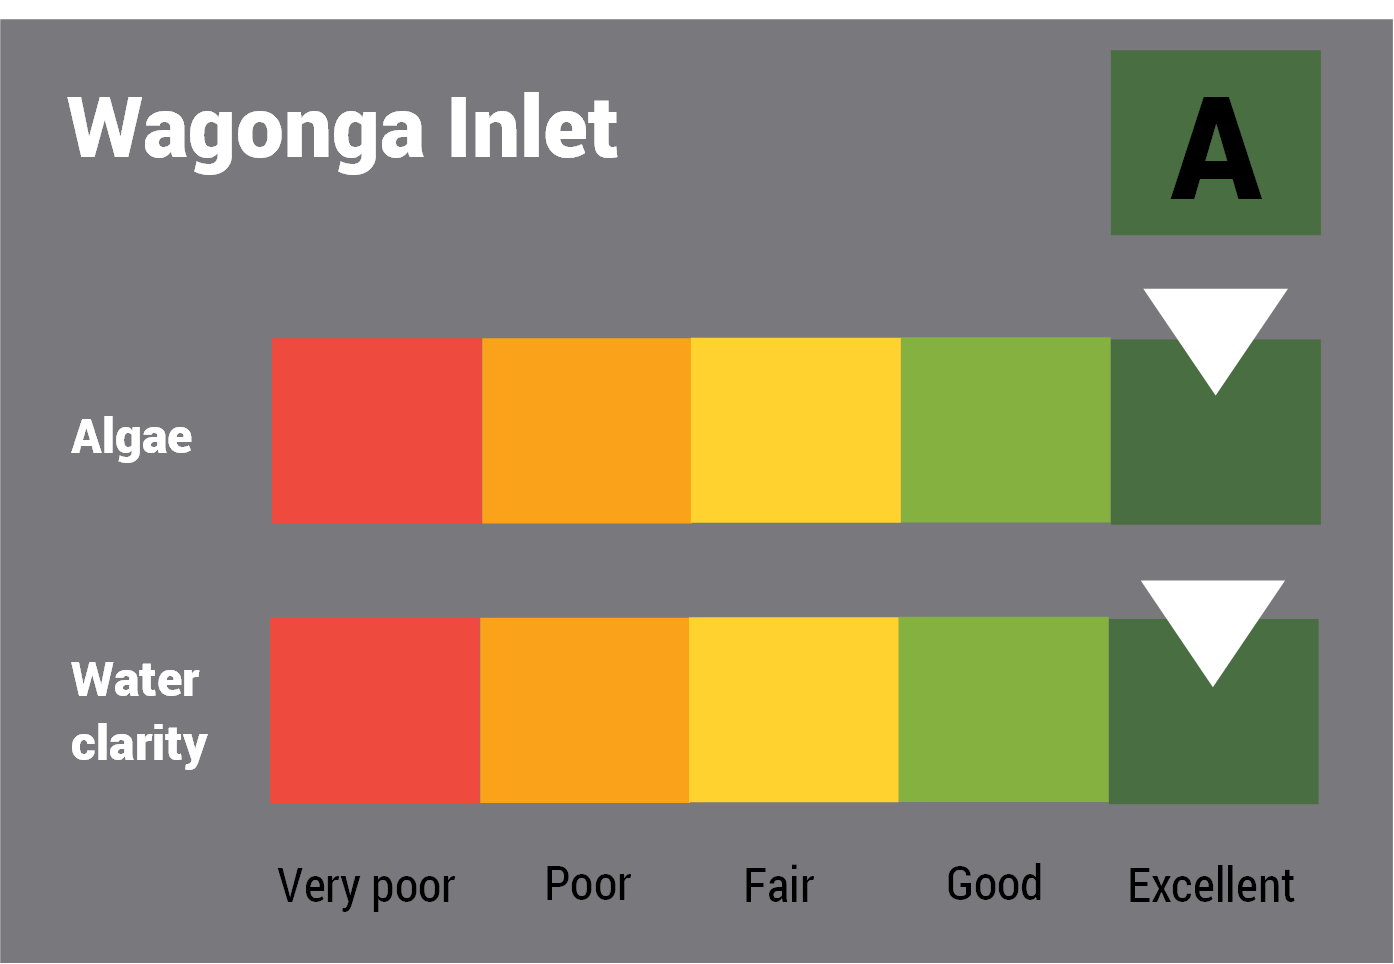 Wagonga Inlet water quality report card for algae and water clarity showing colour-coded ratings (red, orange, yellow, light green and dark green, which represent very poor, poor, fair, good and excellent, respectively). Algae is rated 'excellent' and water clarity is rated 'excellent' giving an overall rating of 'excellent' or 'A'.